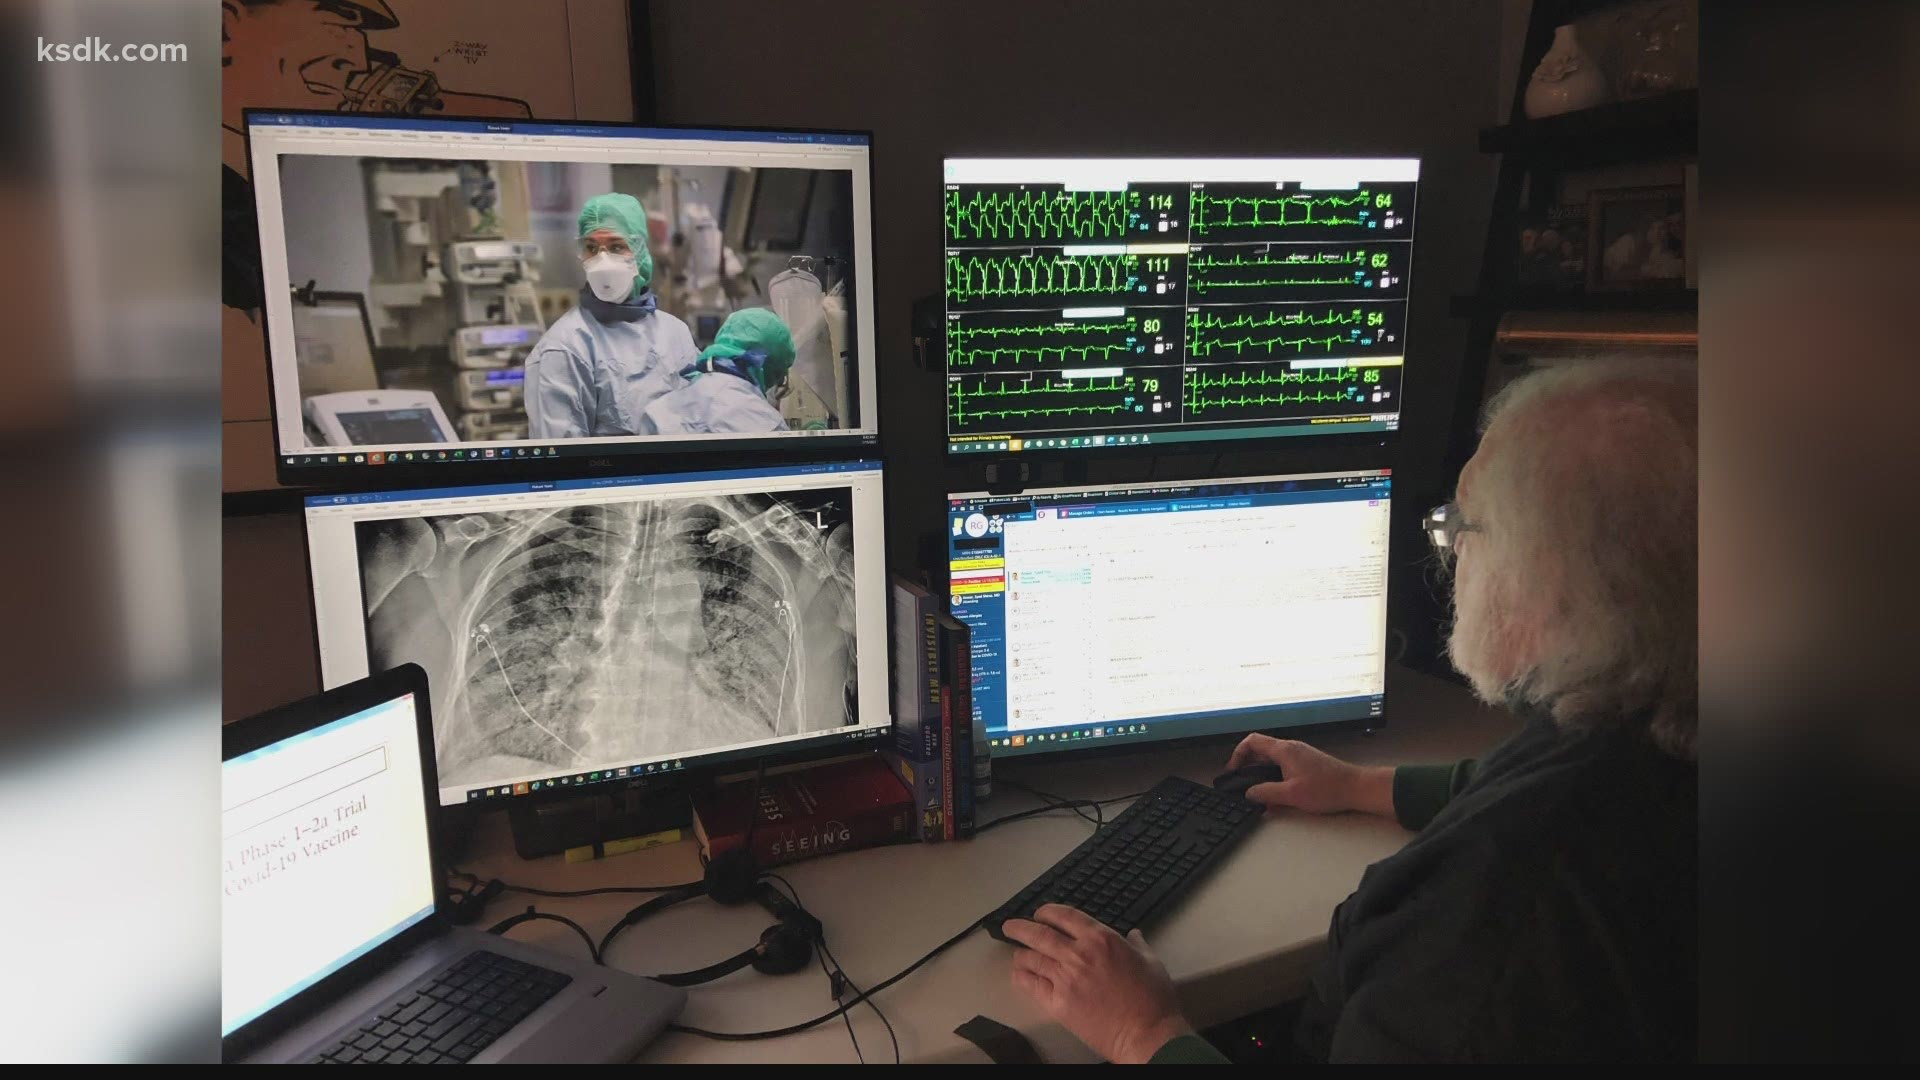 Every night, Dr. Steven Brown logs into dozens of ICU's across the country.